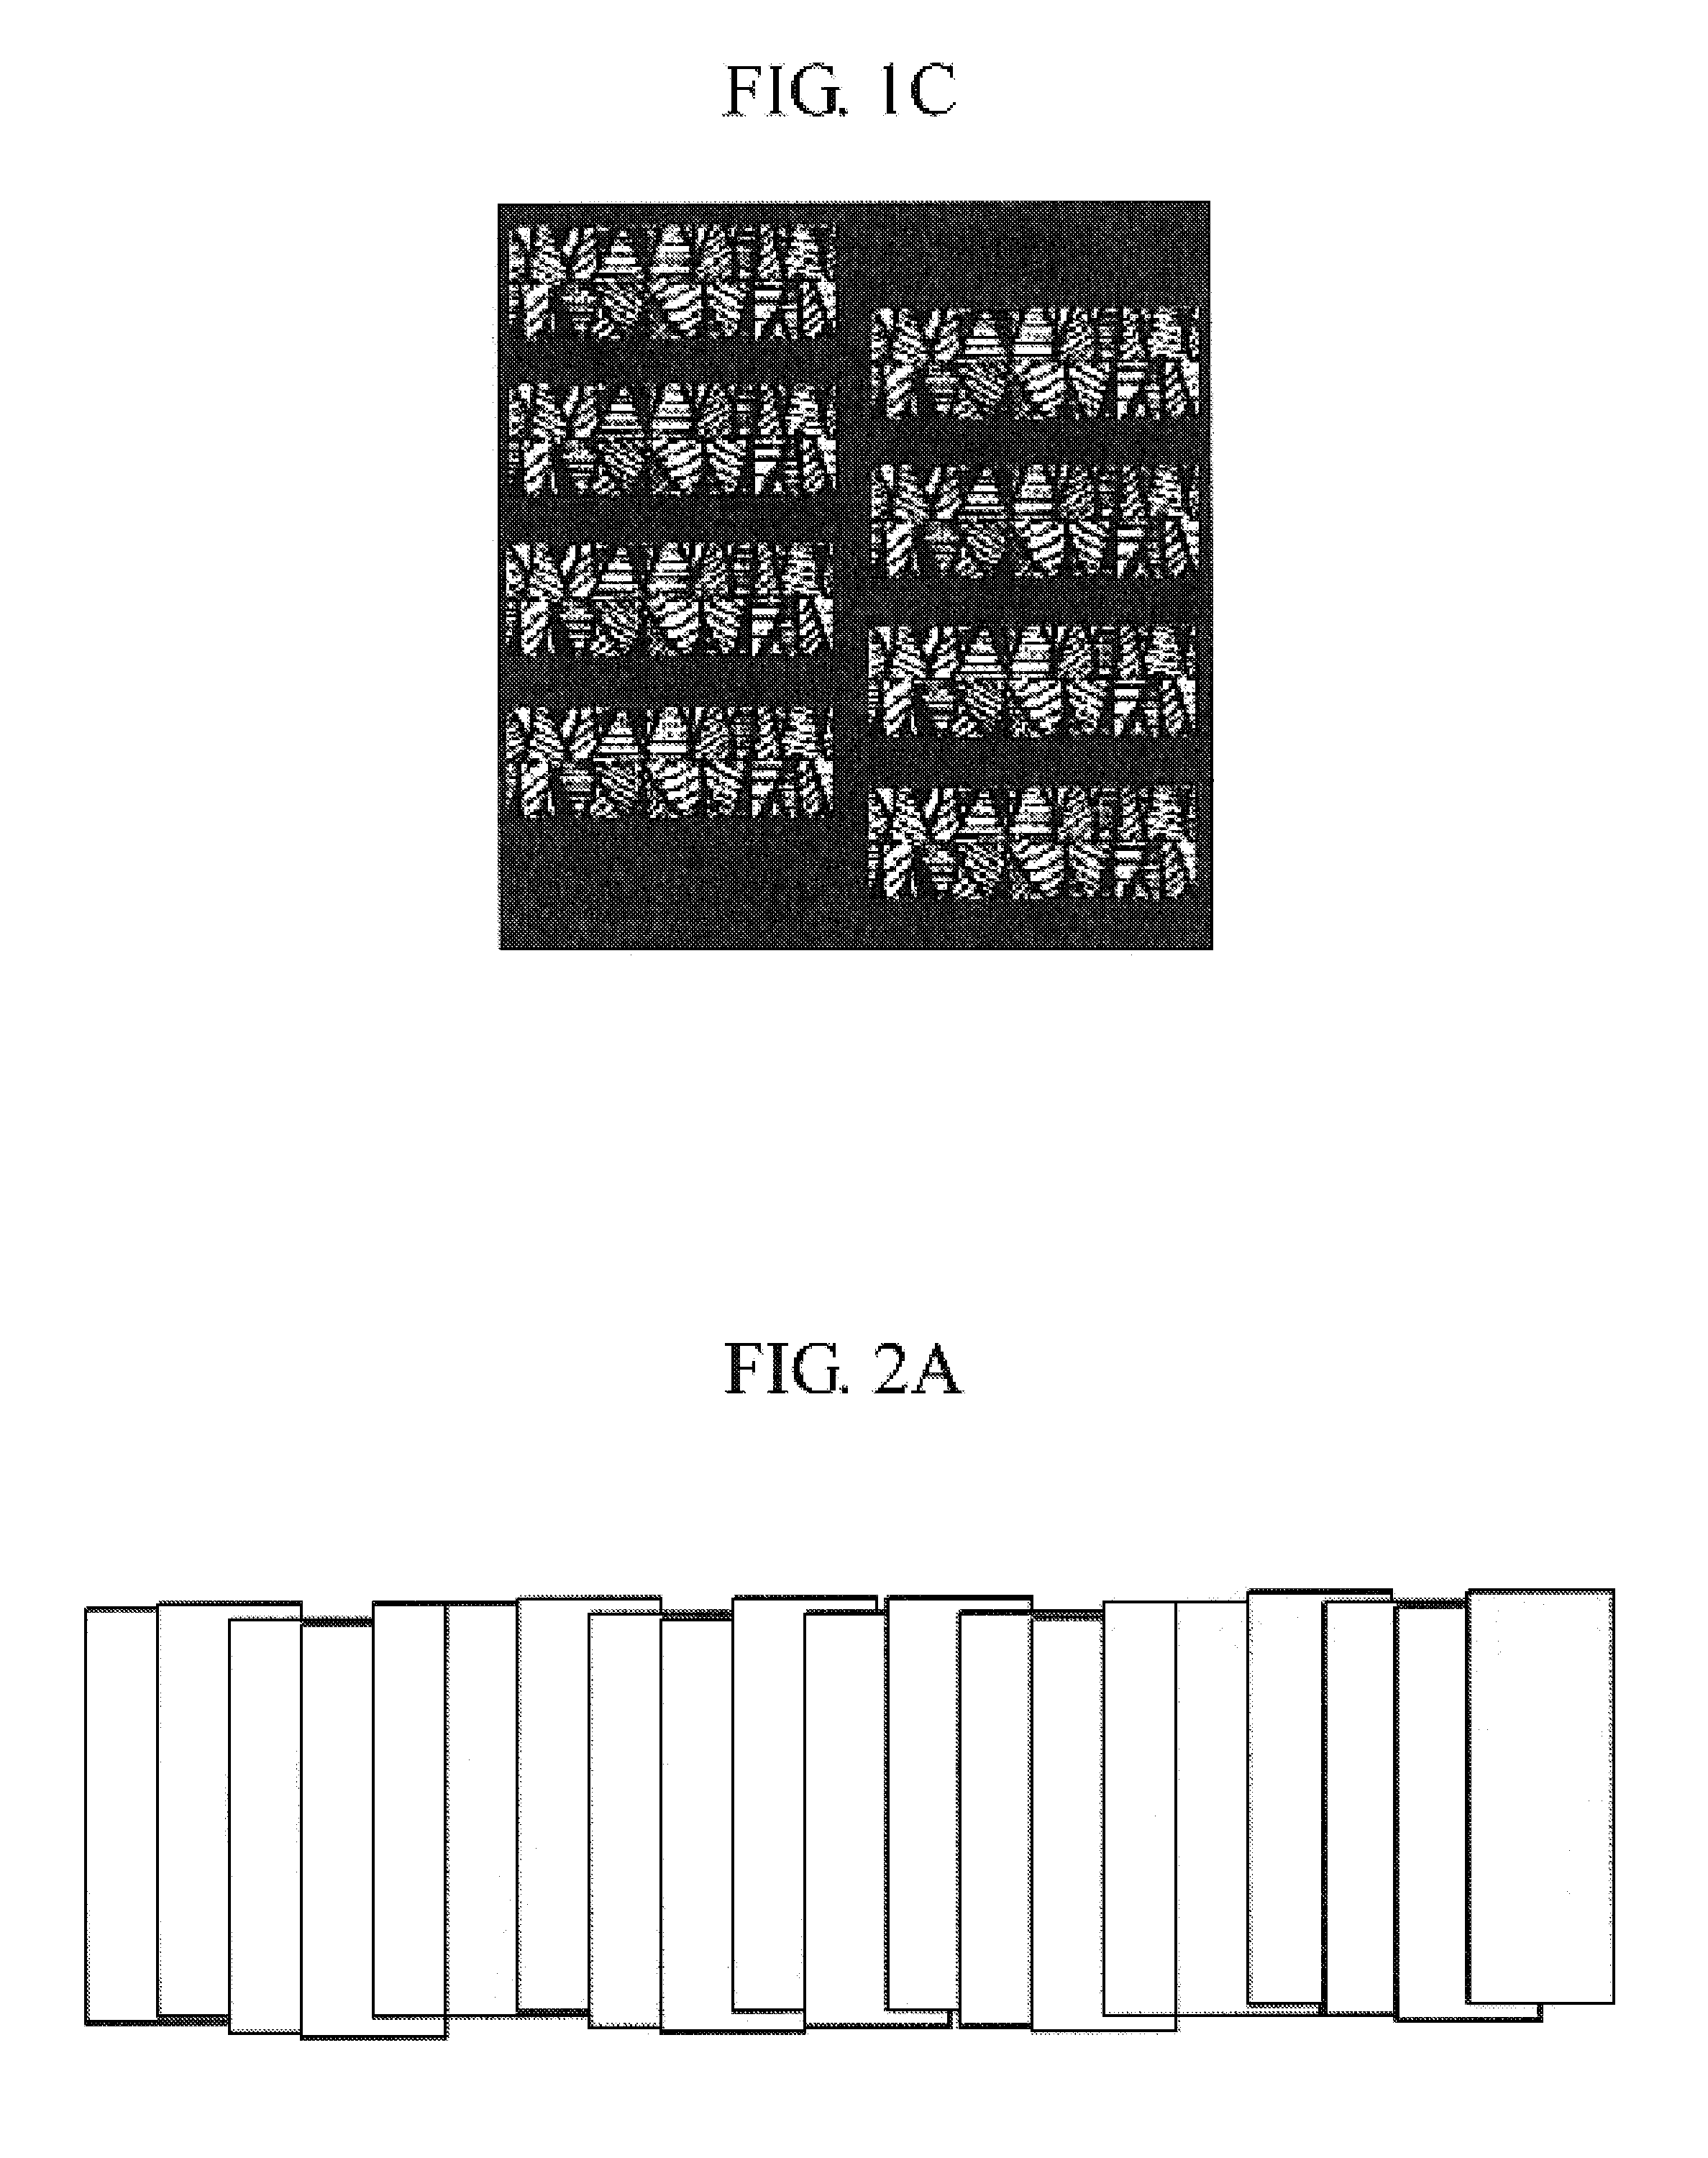 Mask for sequential lateral solidification and method of performing sequential lateral solidification using the same